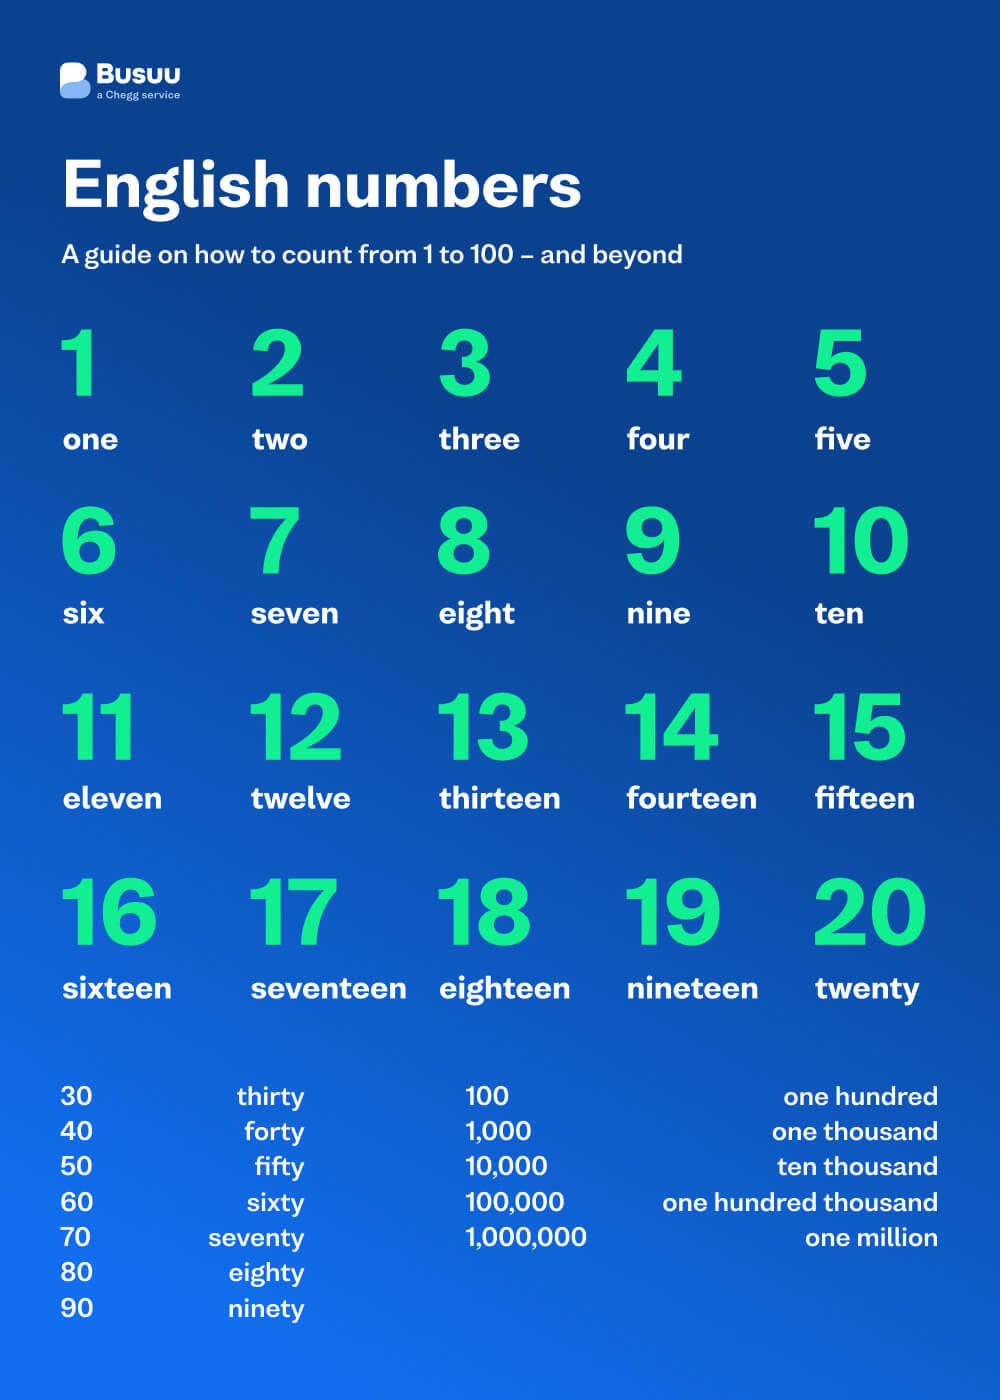 English numbers infographic, courtesy of Busuu